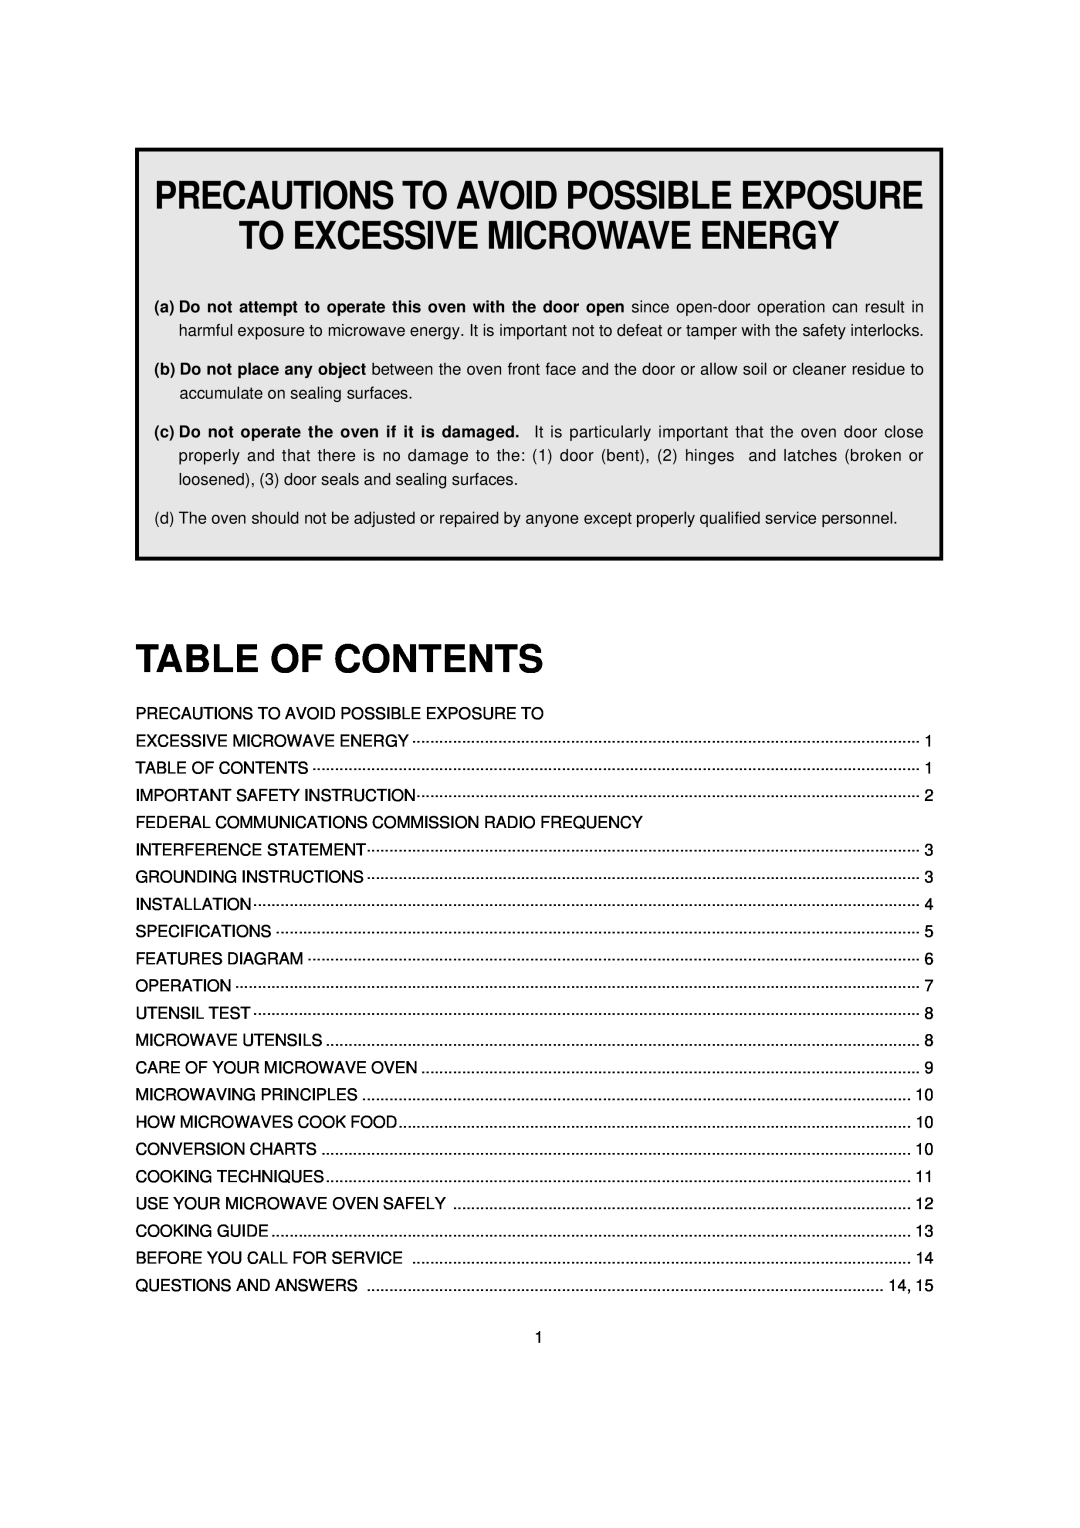 Turbo Air TMW-1100M manual To Excessive Microwave Energy, Table Of Contents, Precautions To Avoid Possible Exposure 